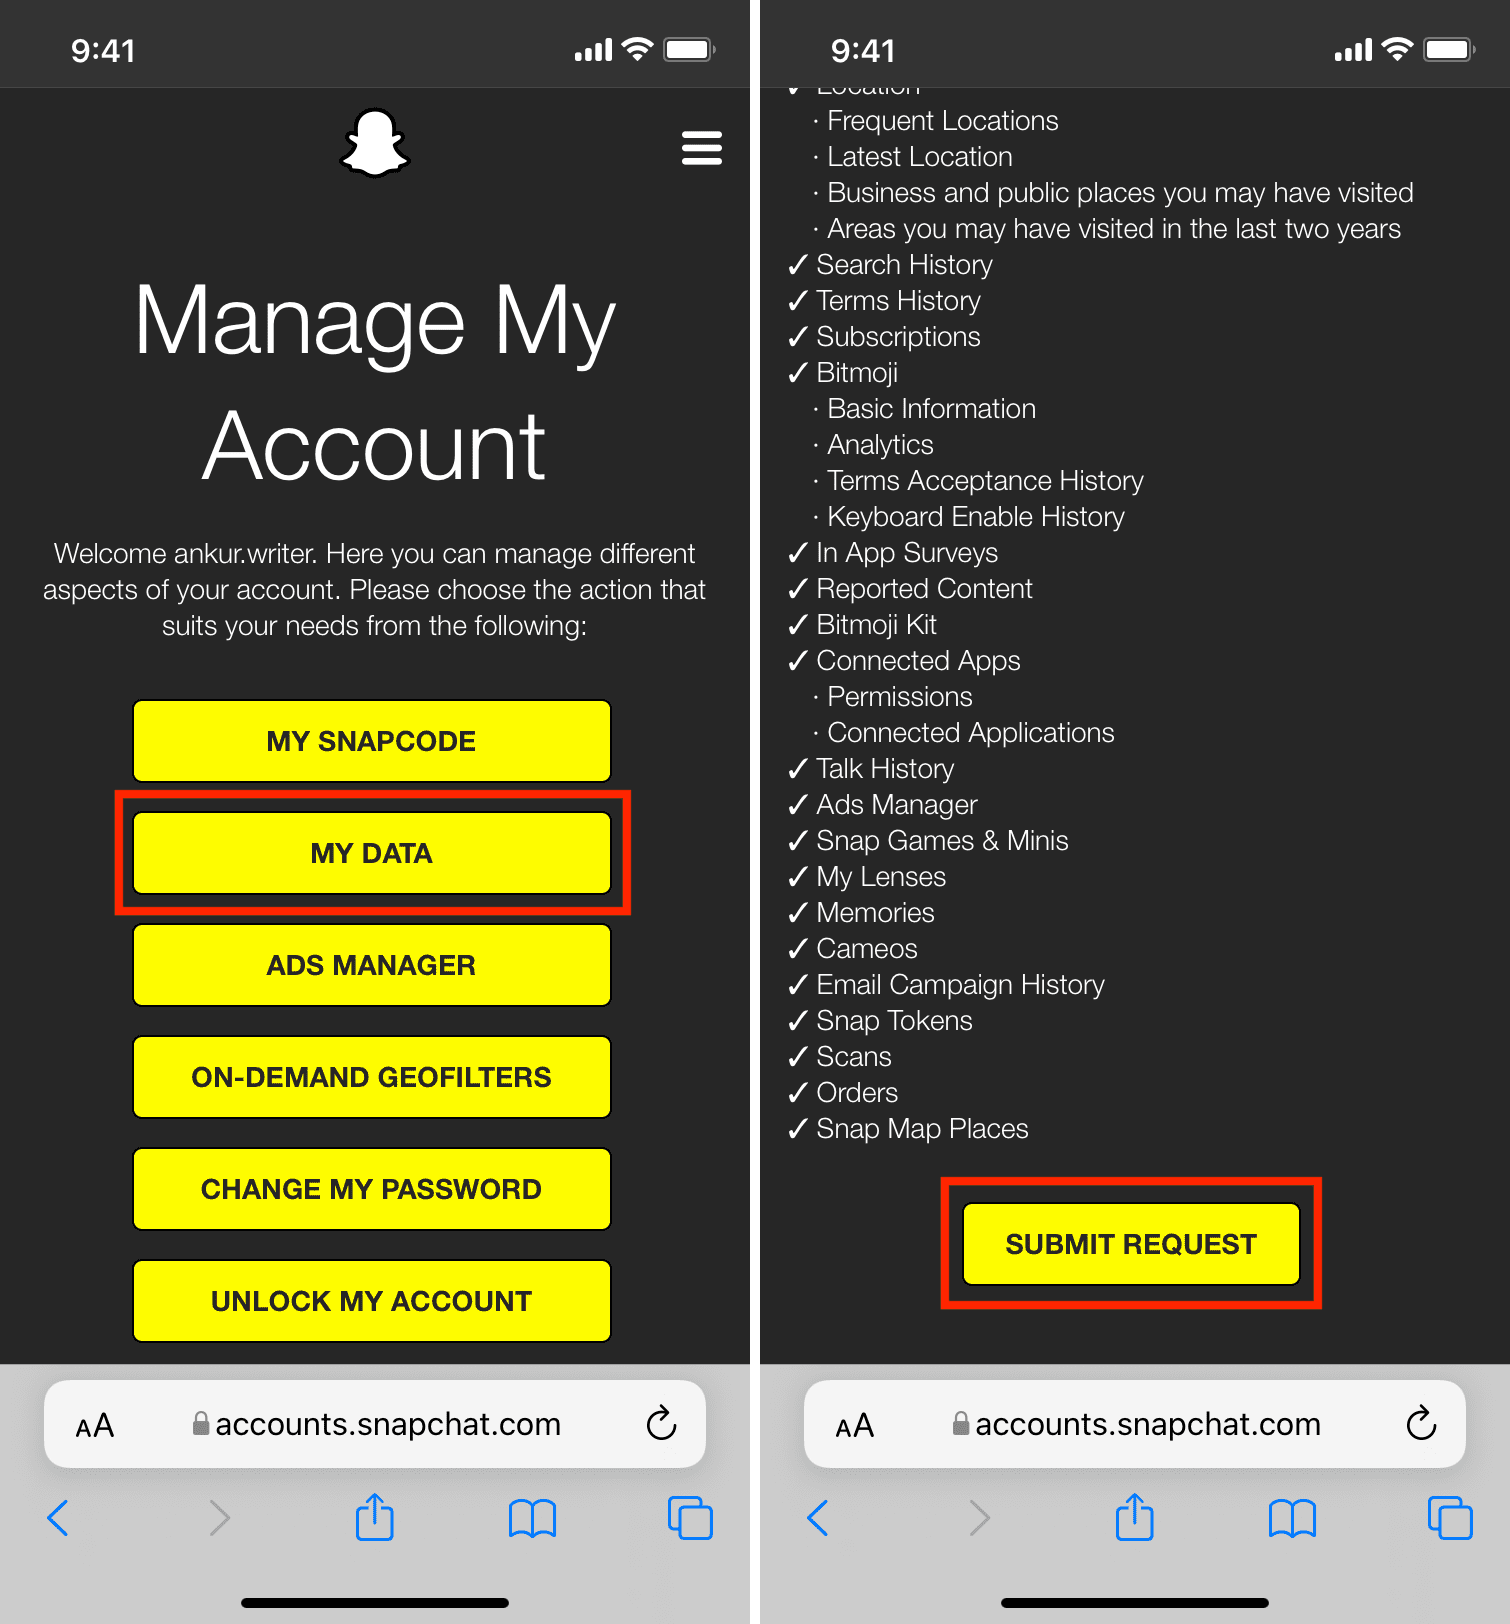 Download your Snapchat data before deleting Snapchat account permanently